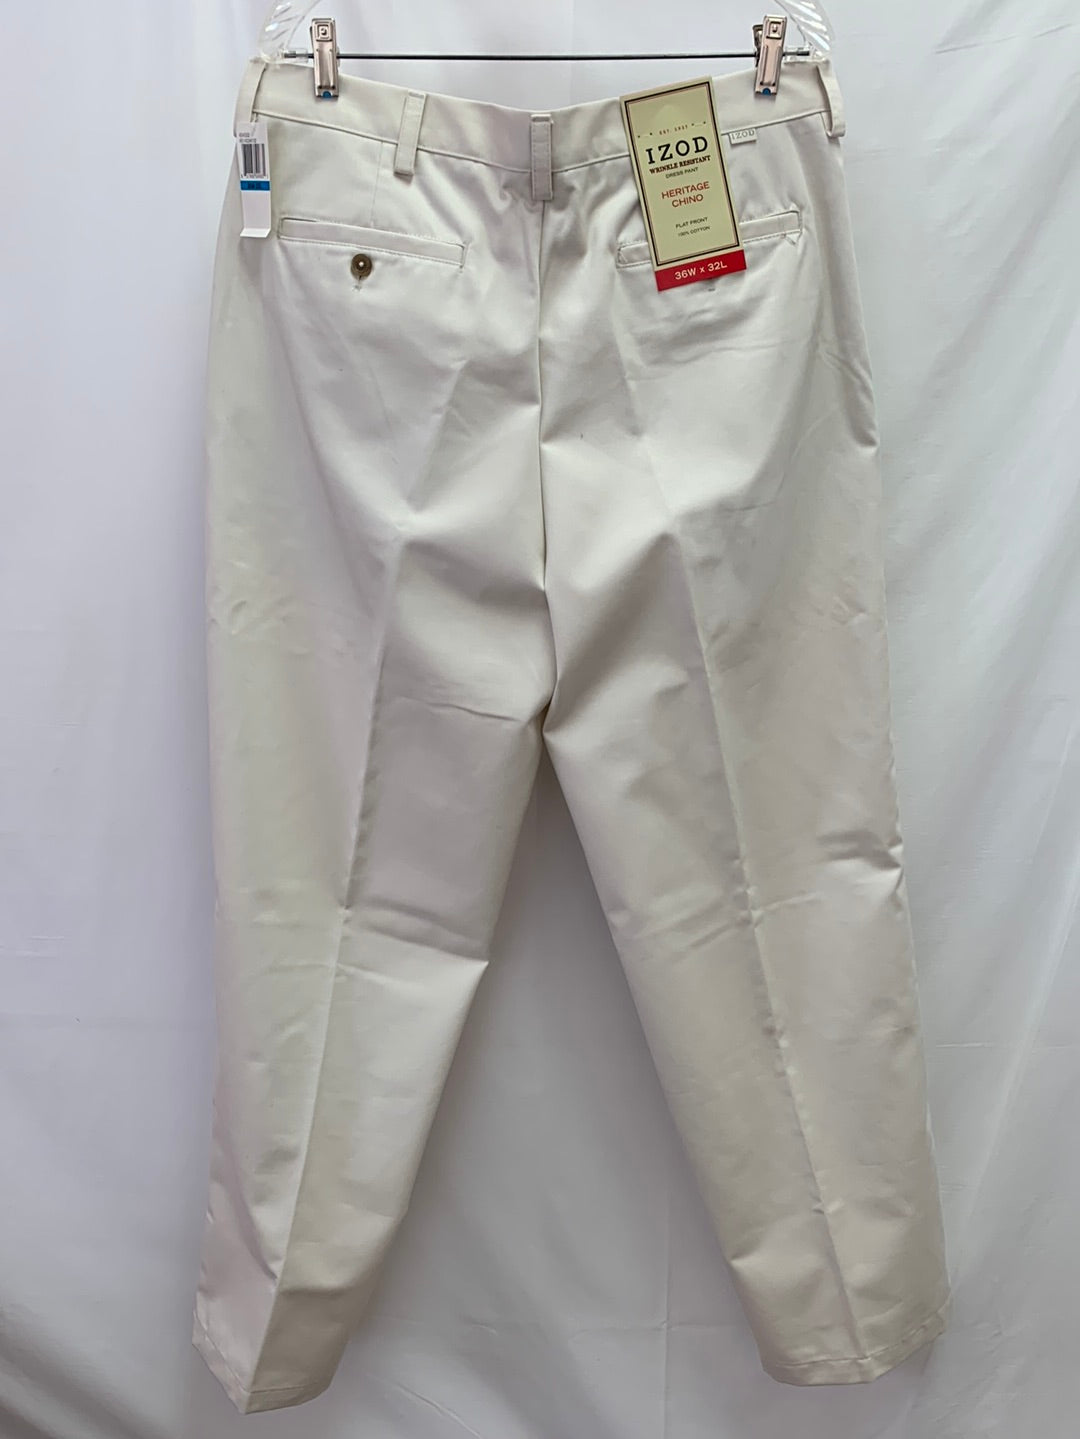 NWT - IZOD beige Heritage Chino Flat Front Wrinkle Resistant Pants - 36W x 32L